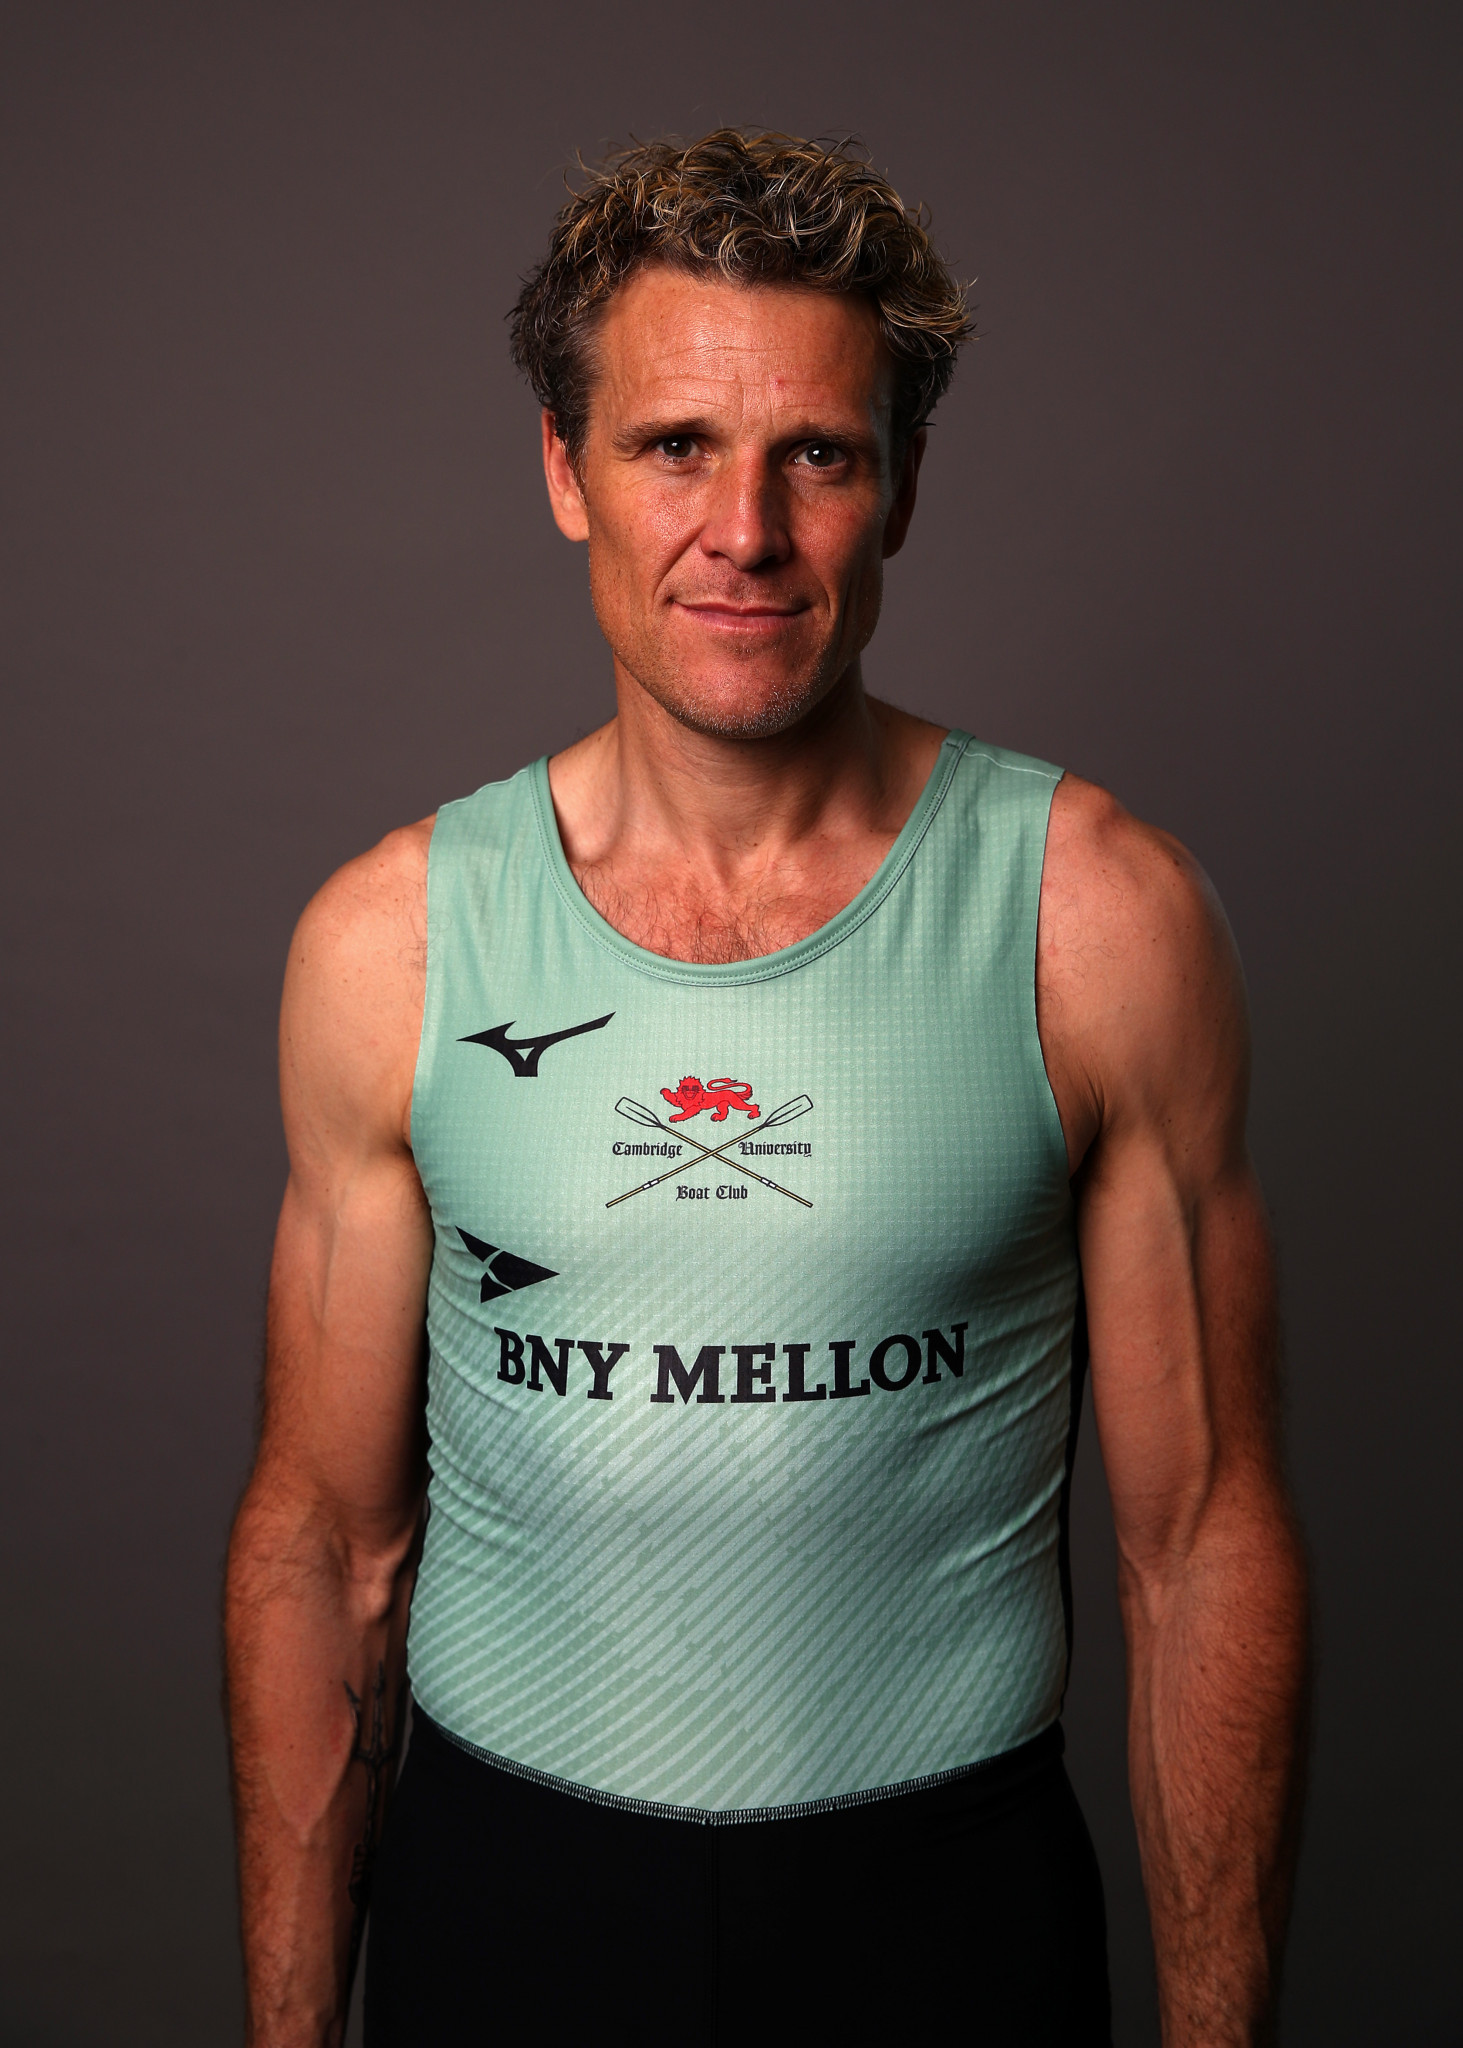 James Cracknell is due to compete in the Boat Race at the age of 46 ©Getty Images